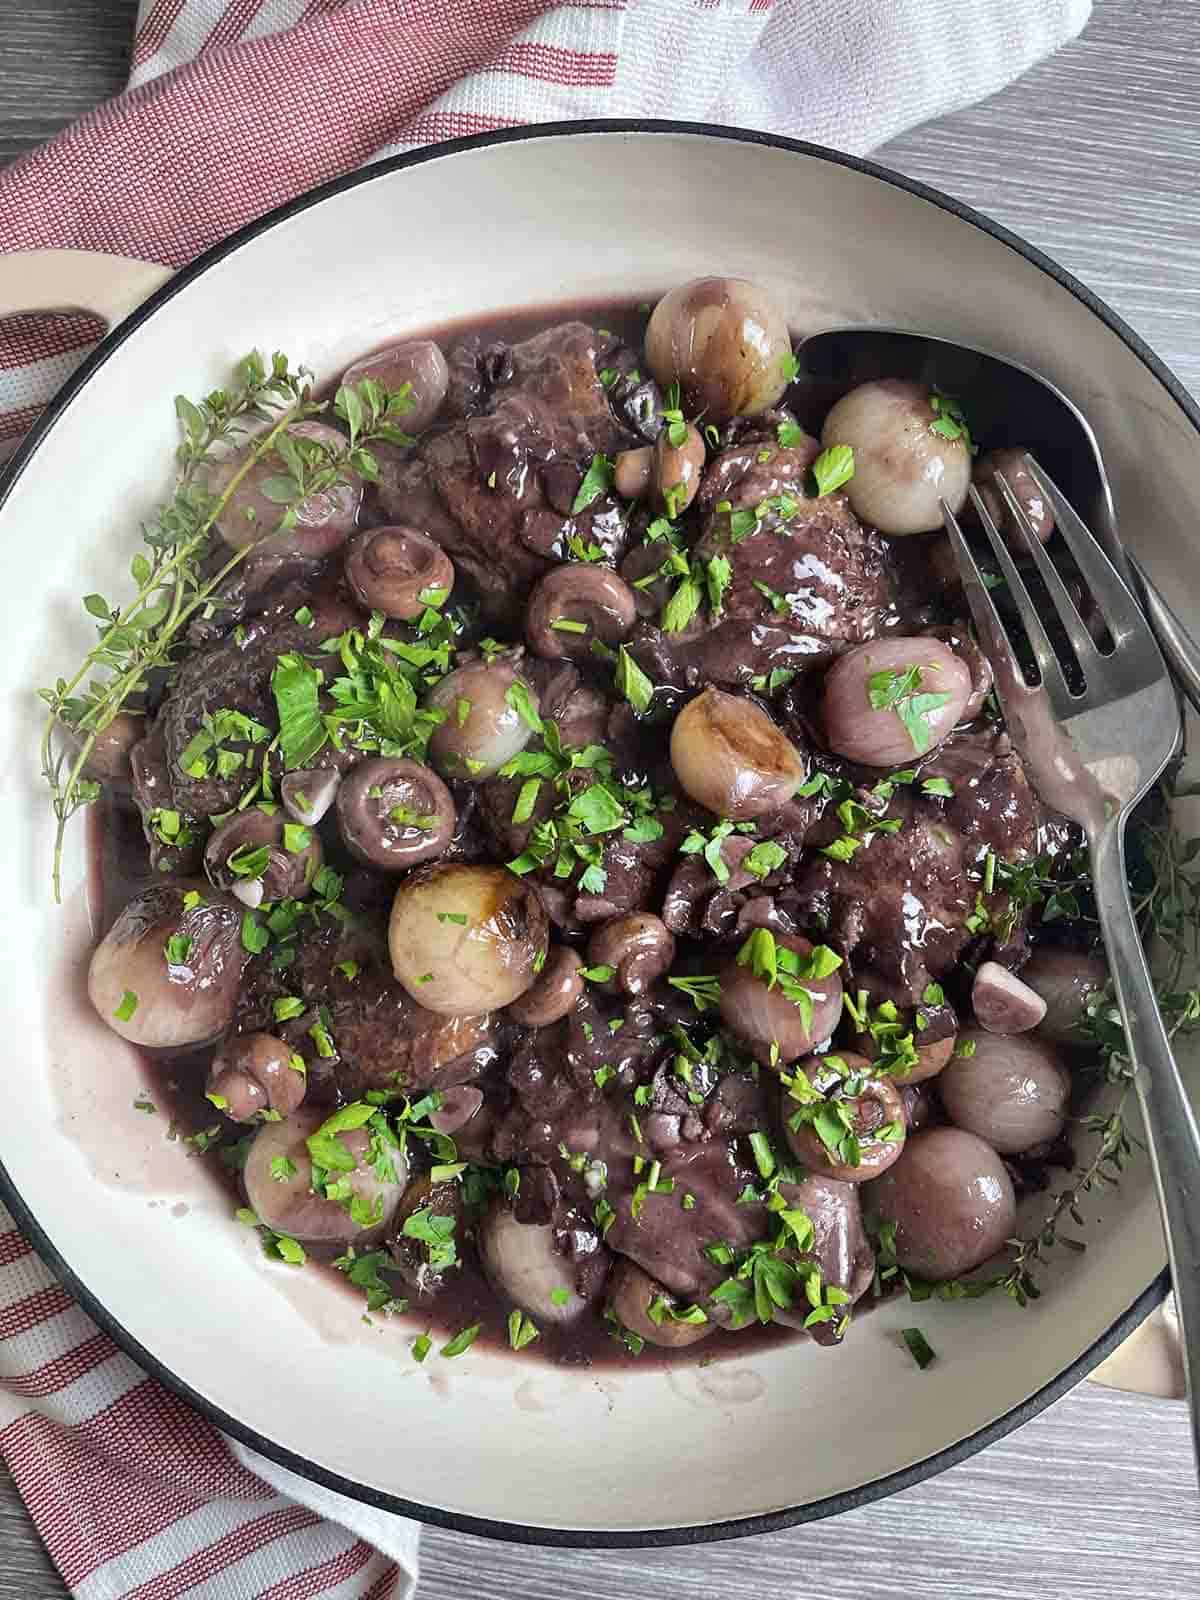 traditional coq au vin or French chicken in red wine in a round casserole dish with a fork.